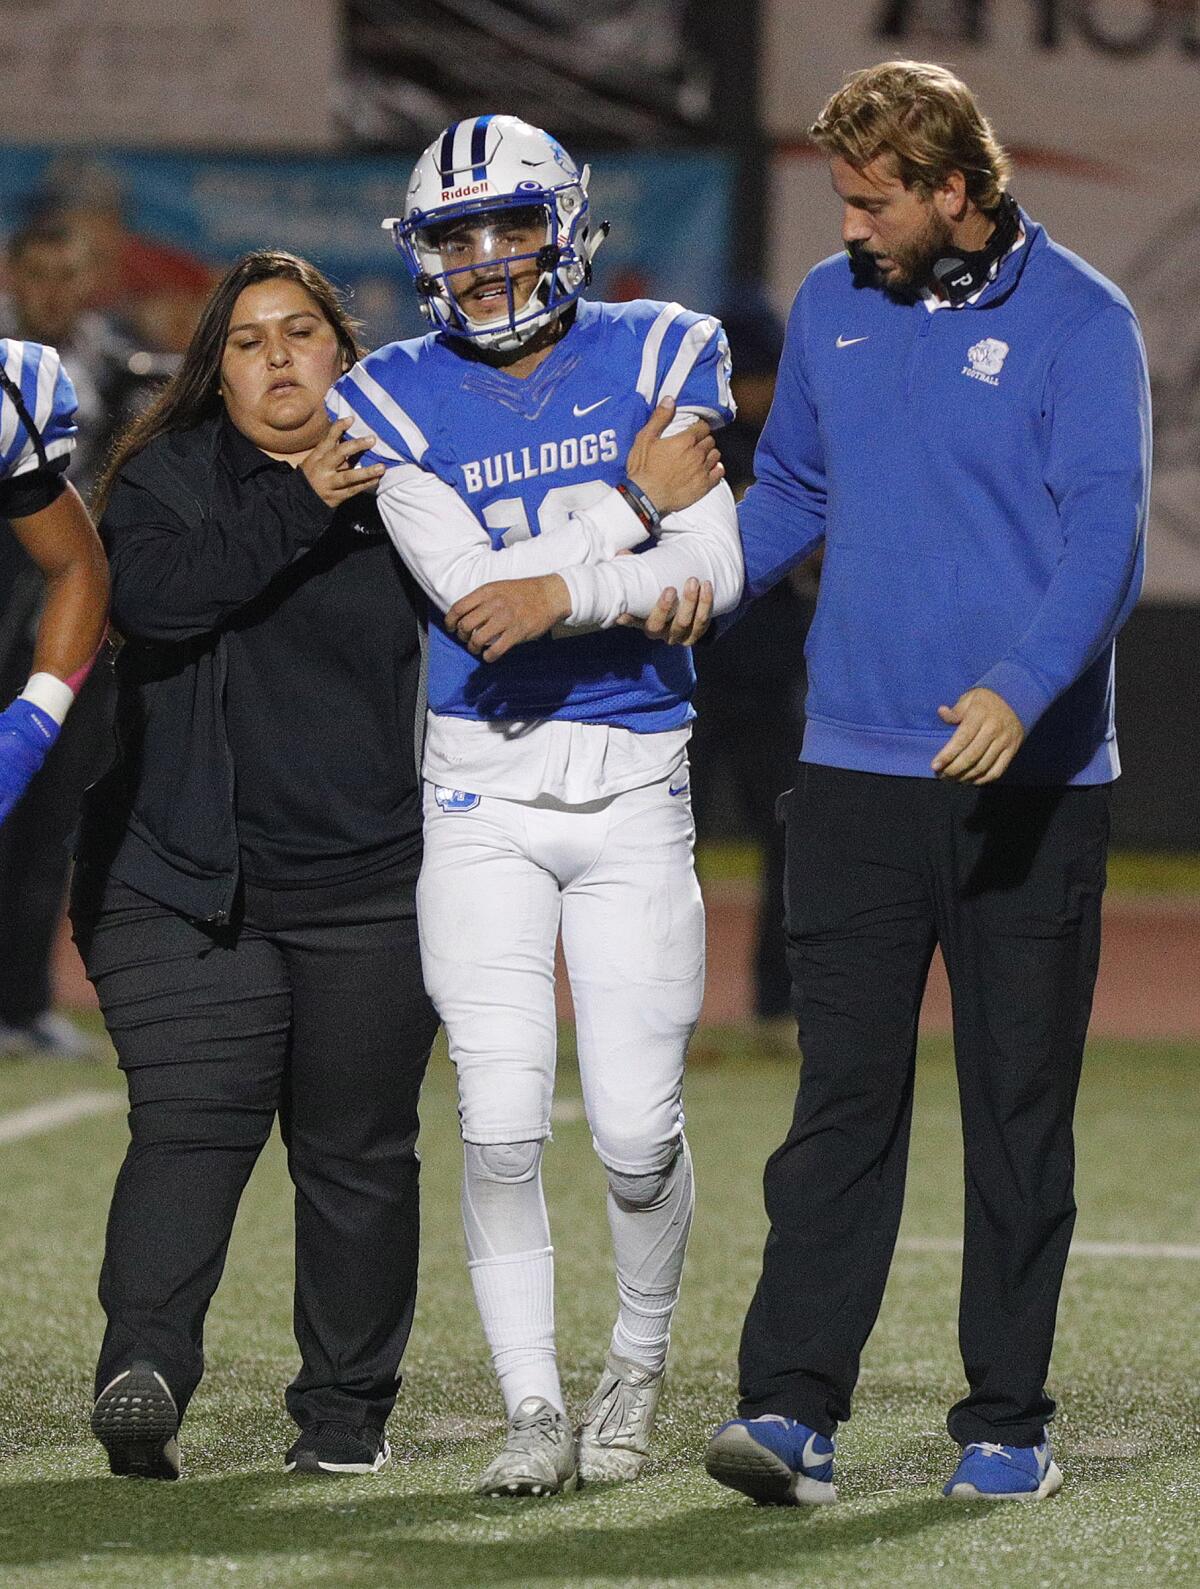 Burbank's quarterback Aram Araradian is helped off the field by an athletic trainer and Burbank's head coach Adam Coleman after being injured during a play against Muir in a Pacific League football game at Burroughs High School on Monday, October 14, 2019. He did not return to the game.